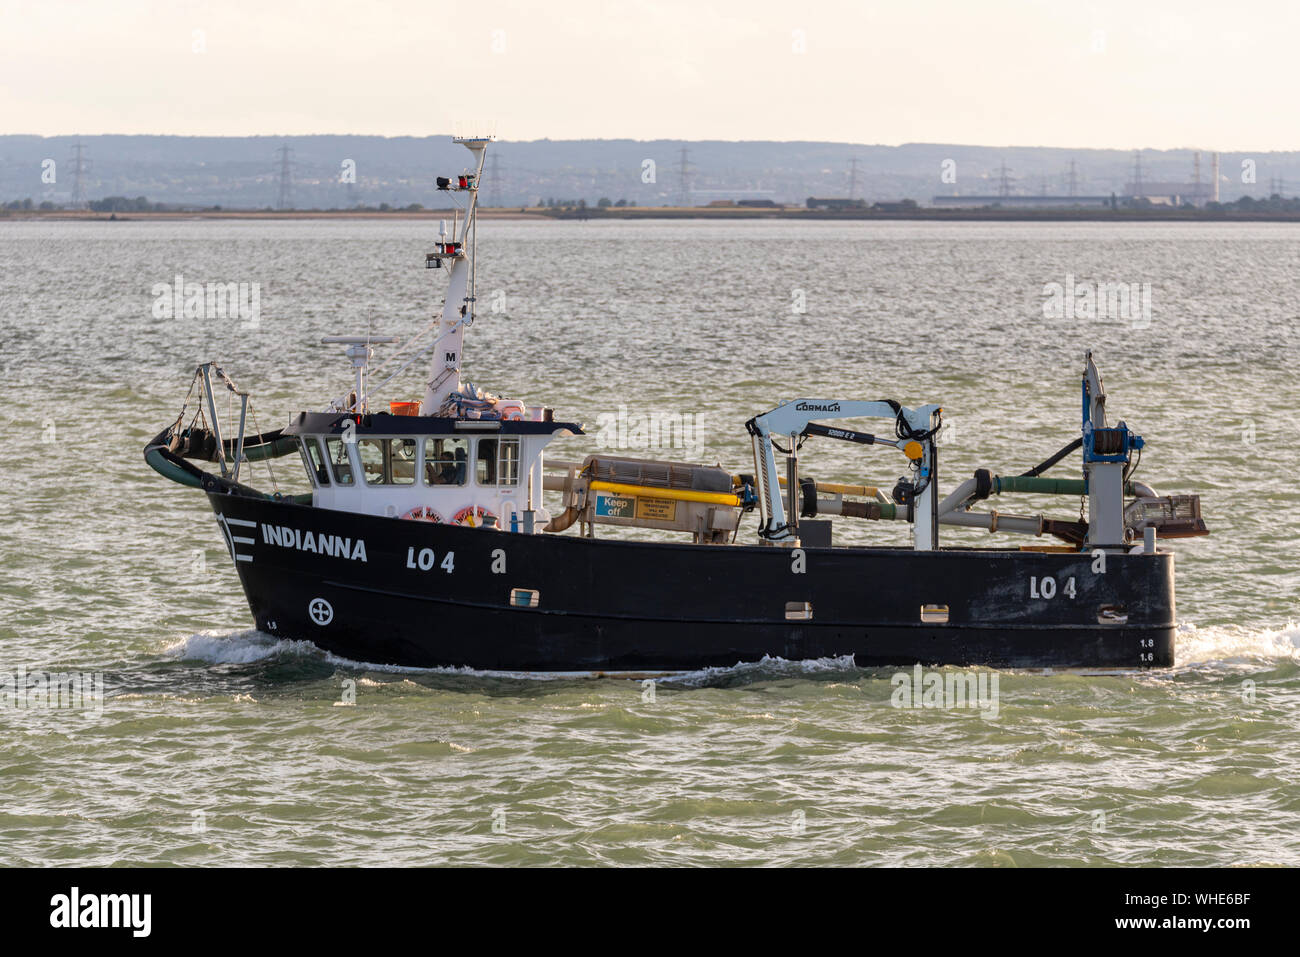 Fishing boat Indianna heading out to sea to fish late afternoon for the night out of Leigh on Sea passing Southend on the Thames Estuary. Industry Stock Photo